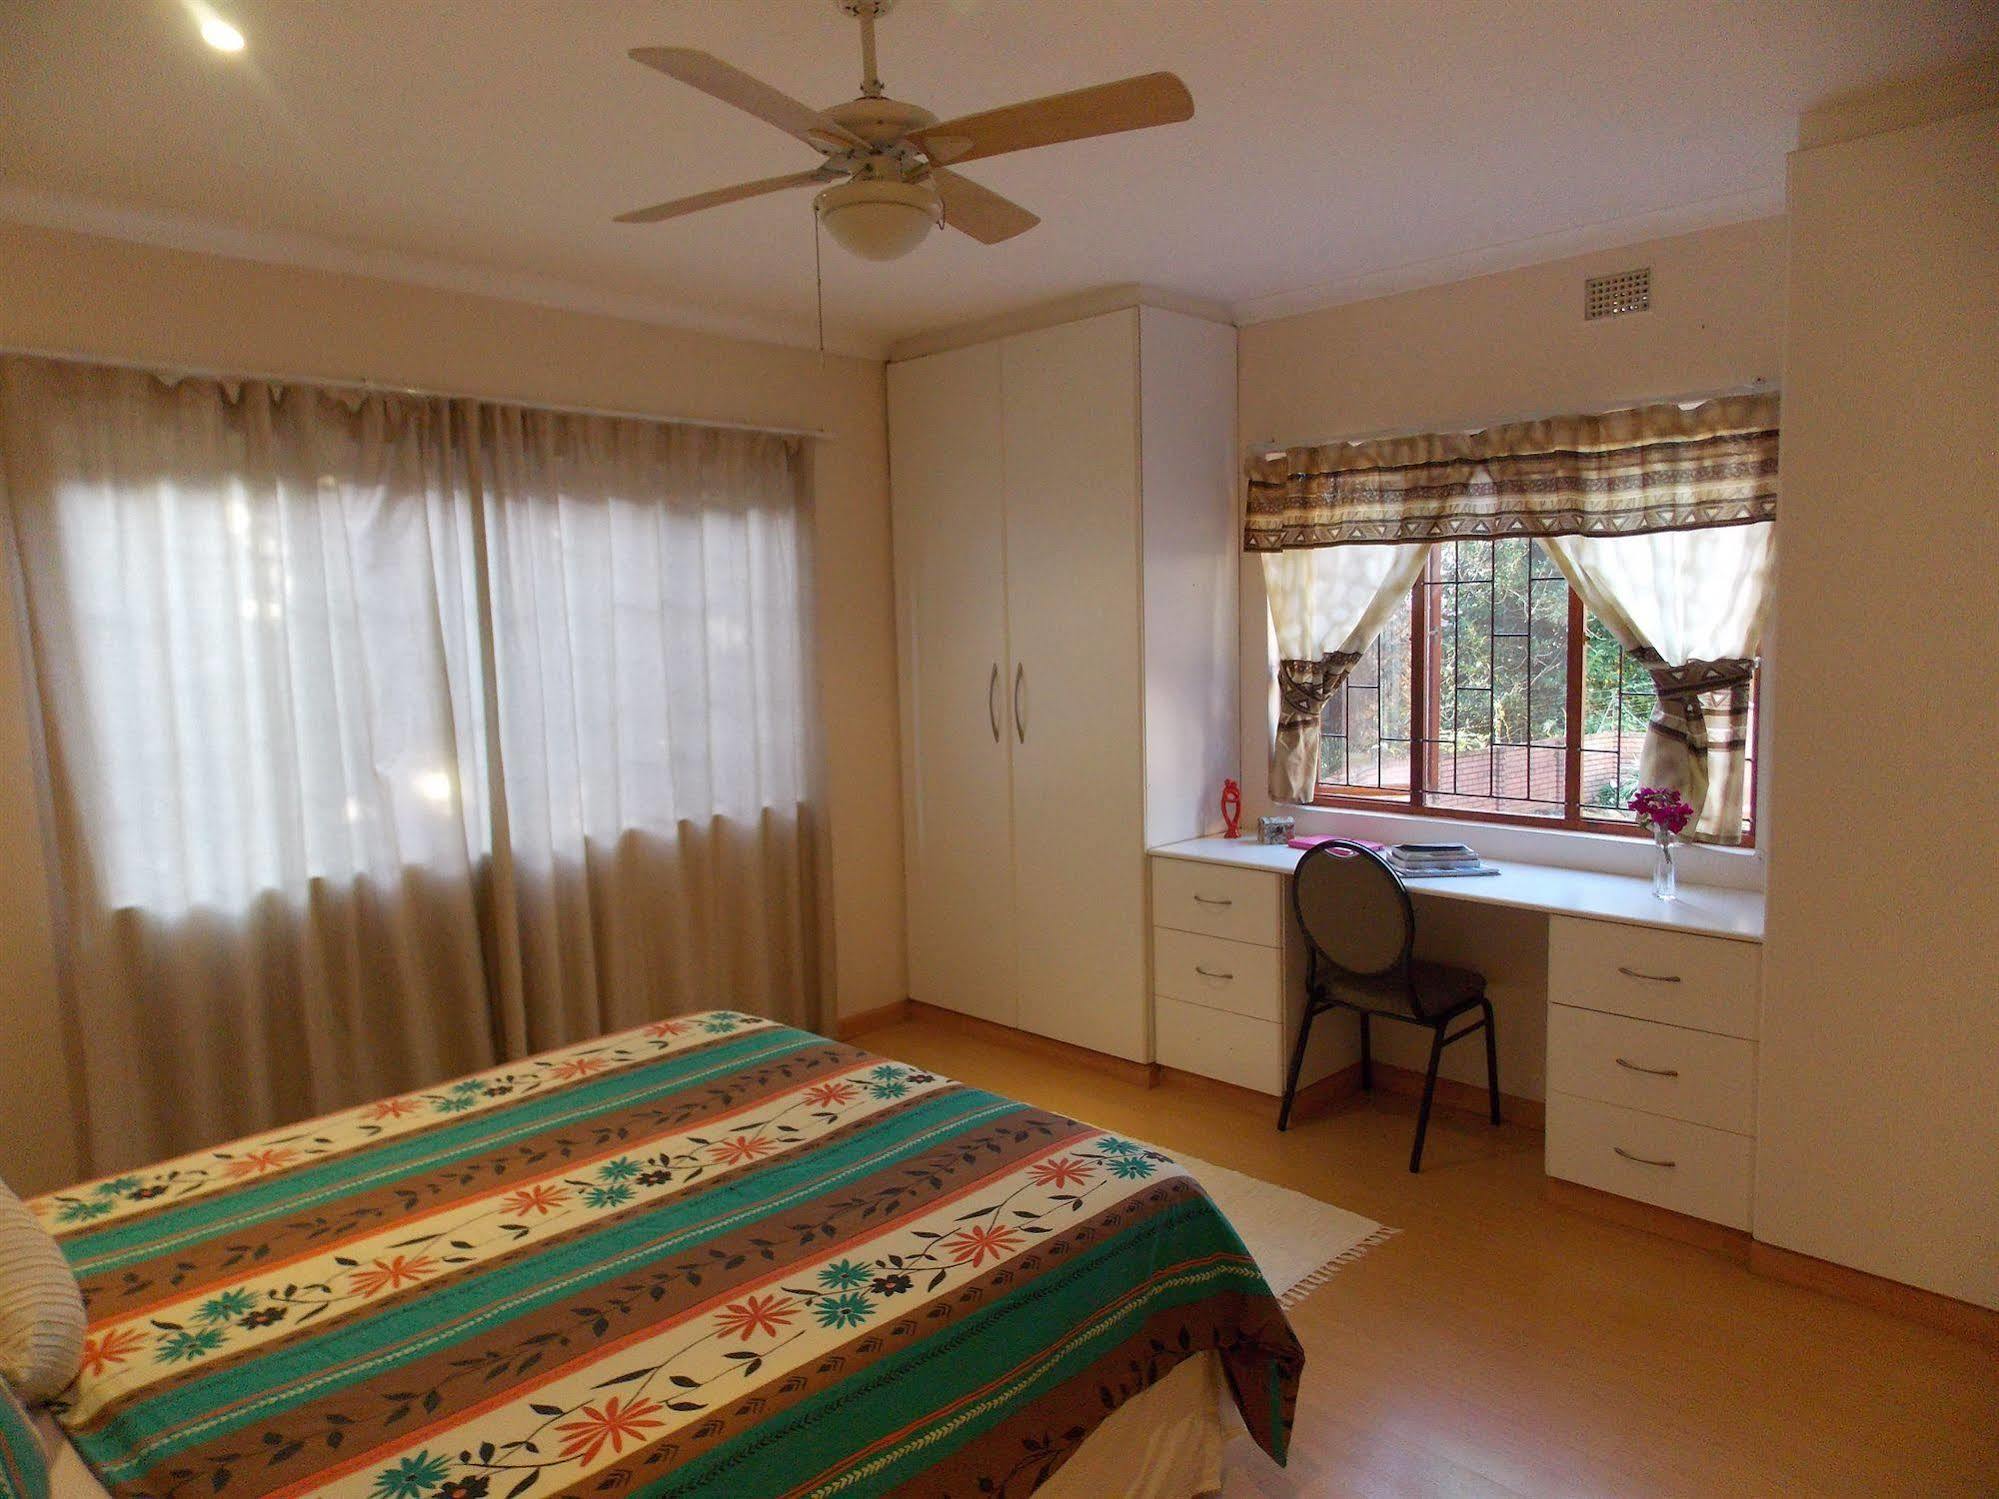 Castelletto Guest House คลูฟ ภายนอก รูปภาพ